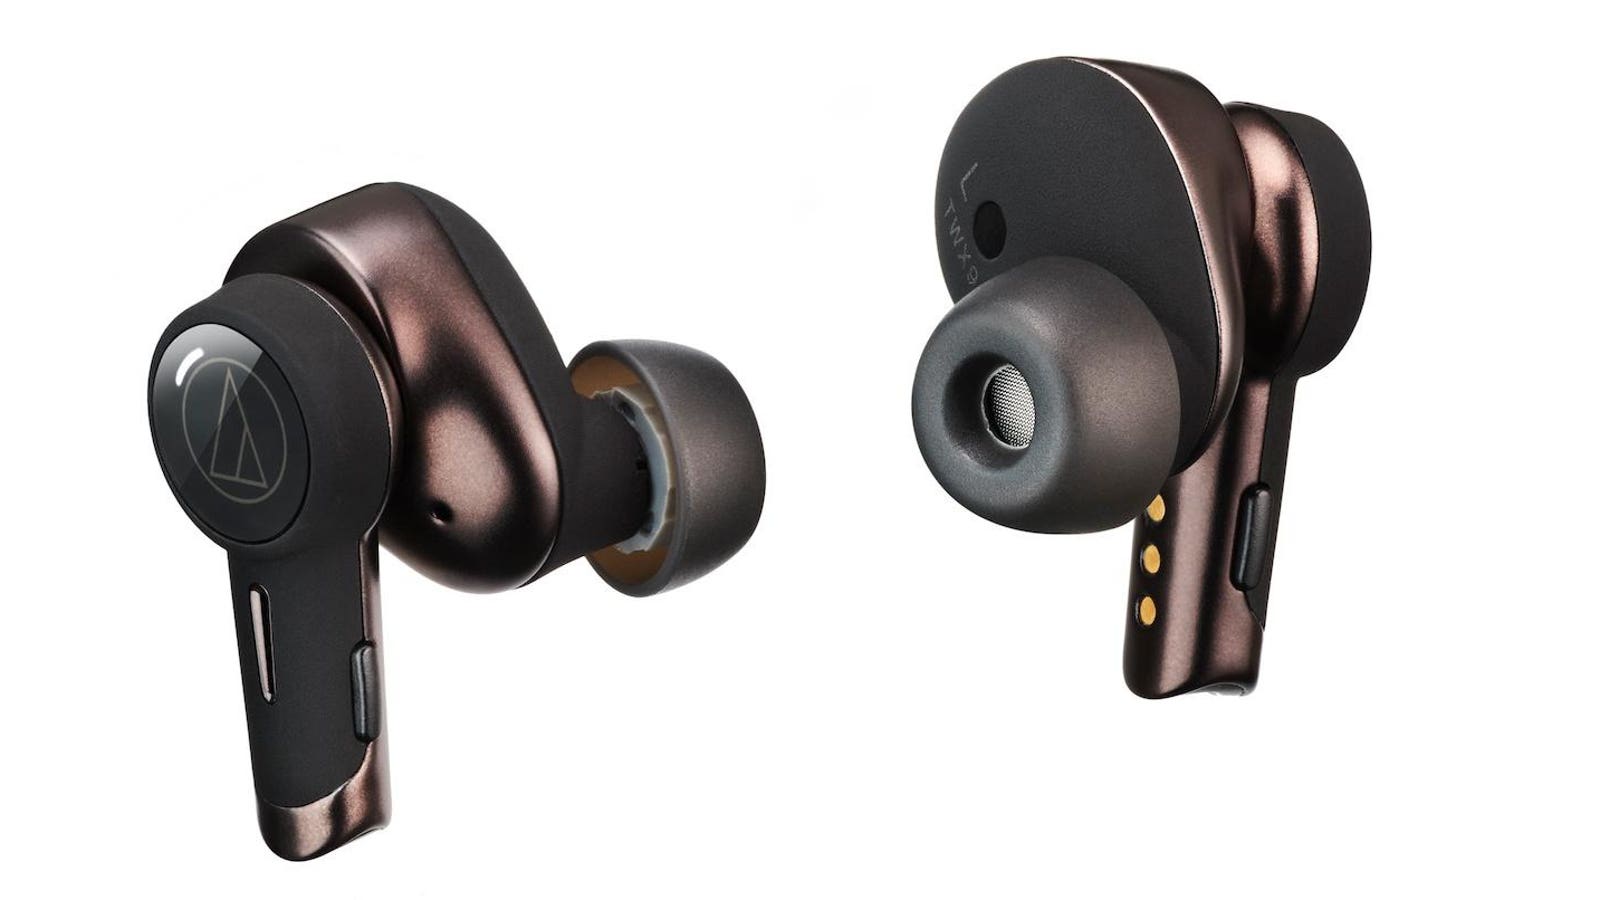 Audio-Technica’s New Flagship True Wireless Earbuds Are Simply Superb